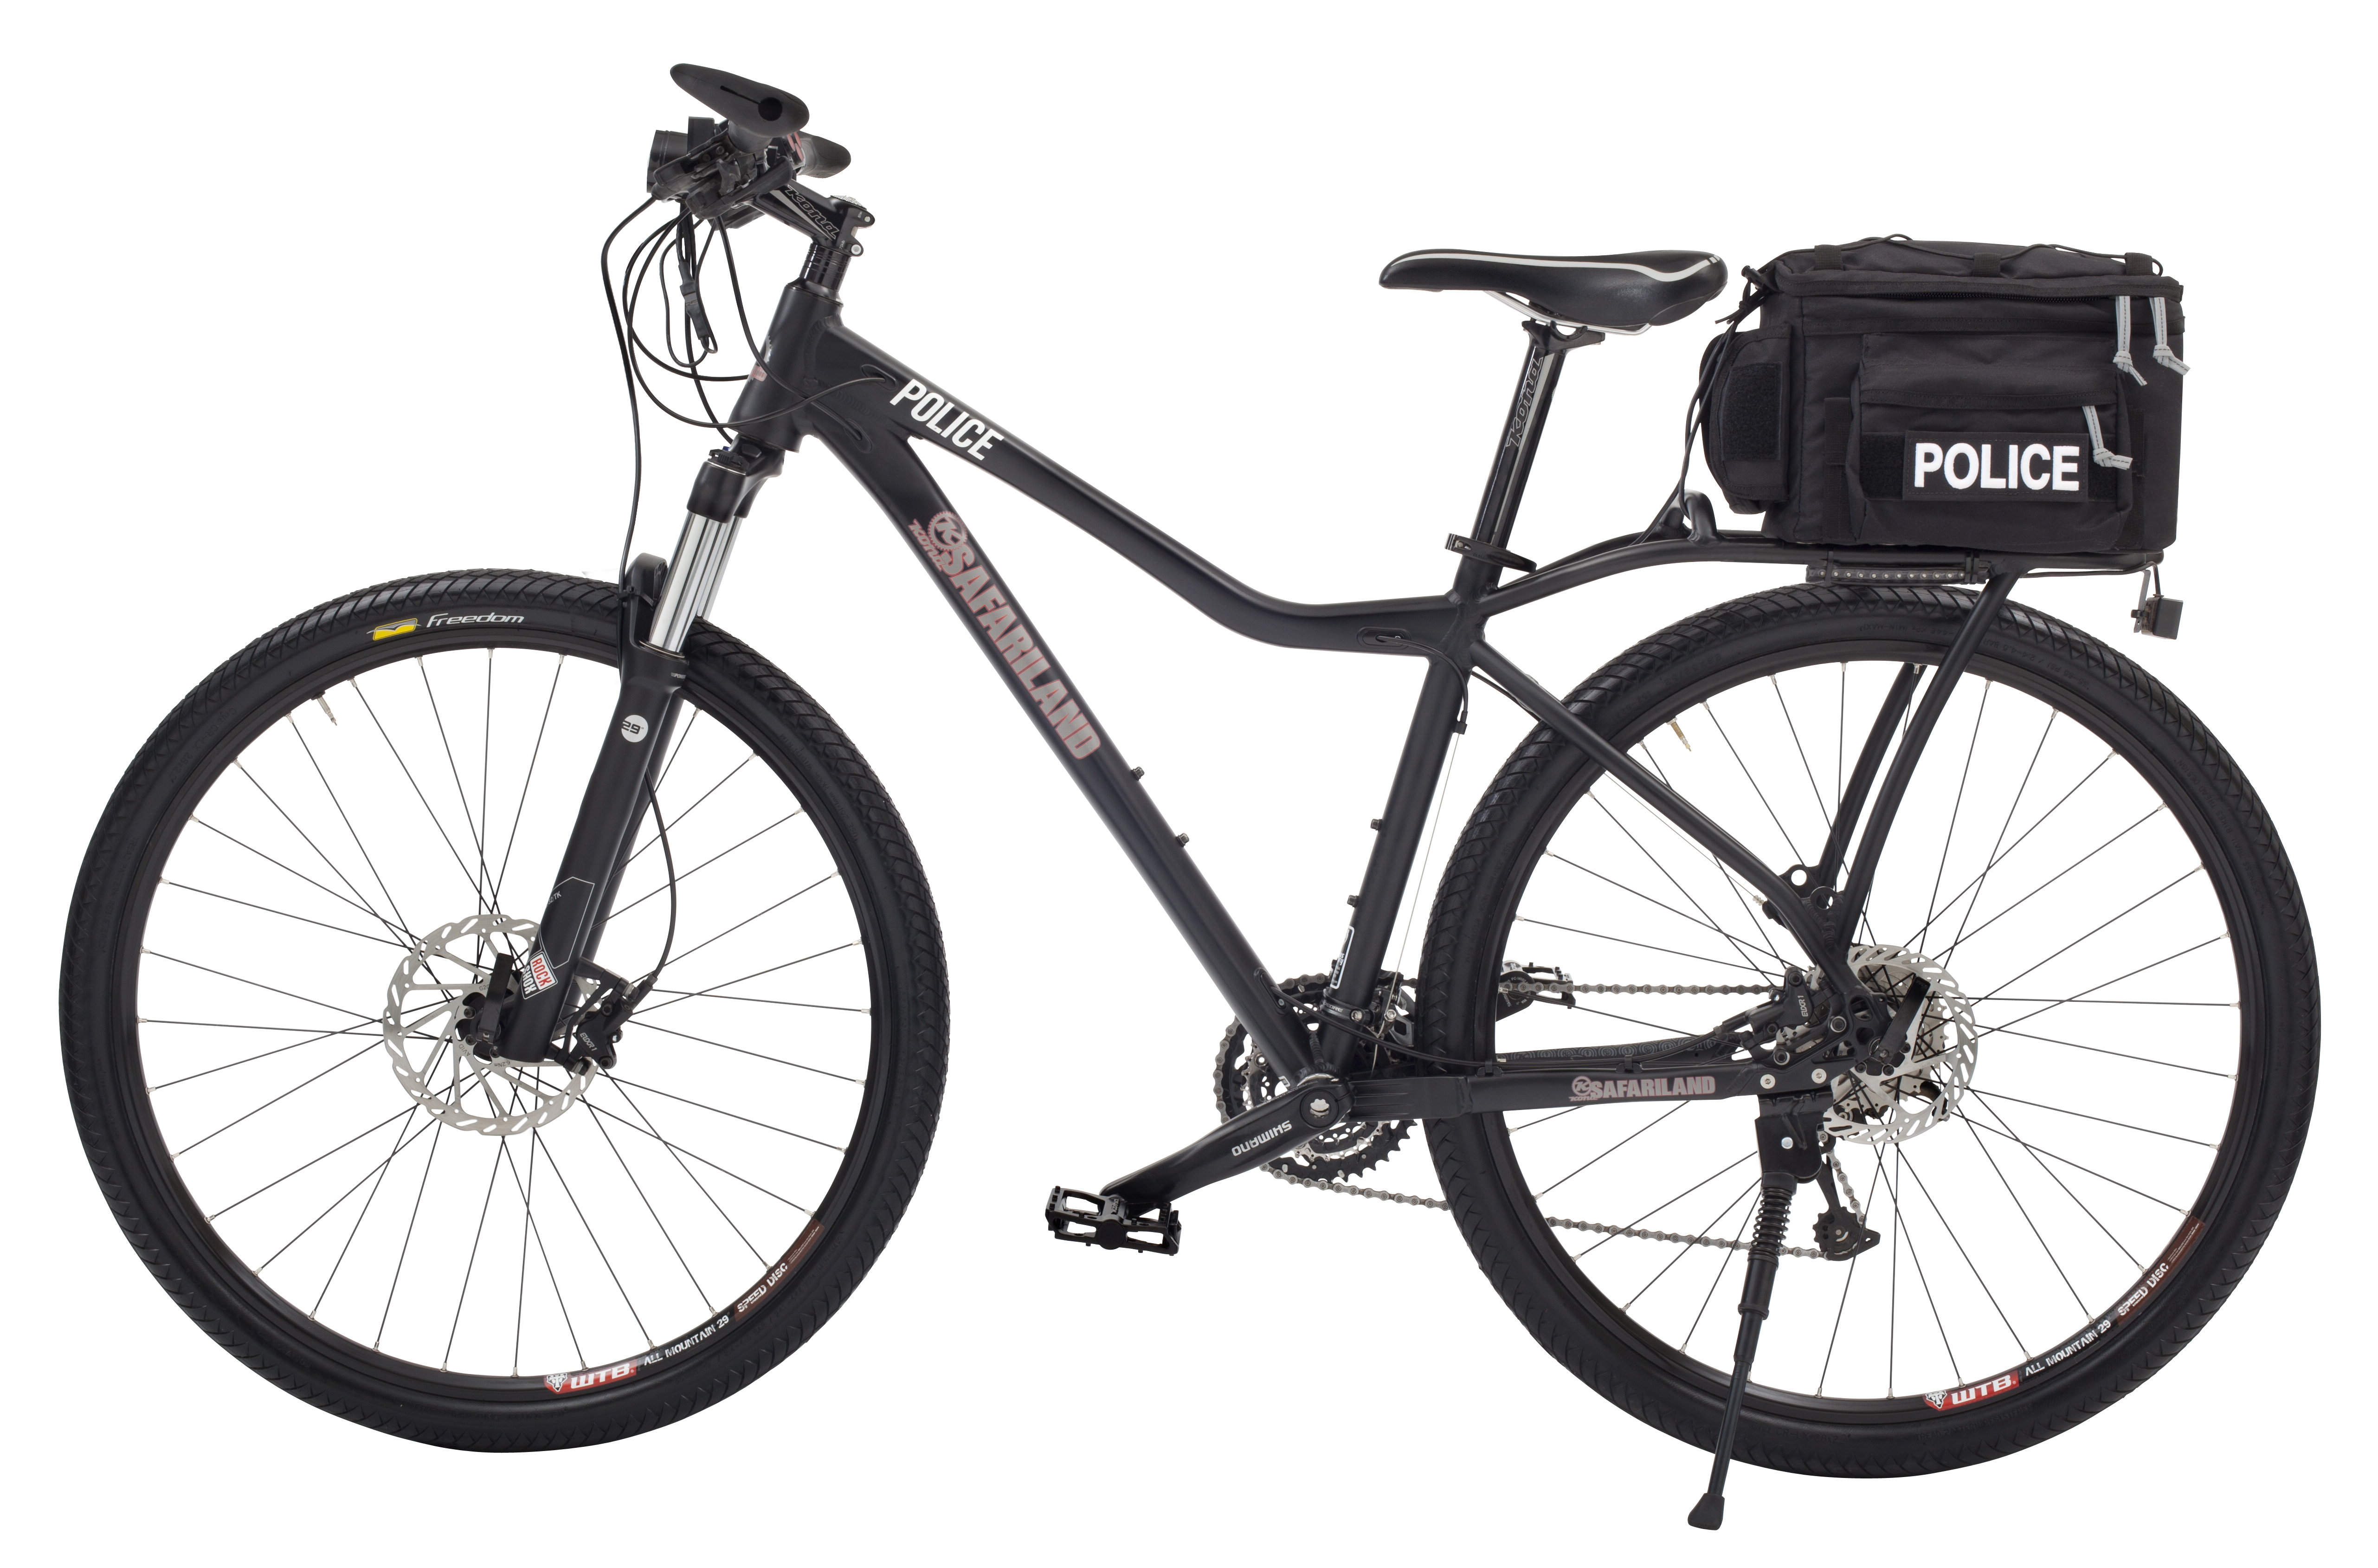 GOP convention to use Kona patrol bikes | Bicycle Retailer and Industry